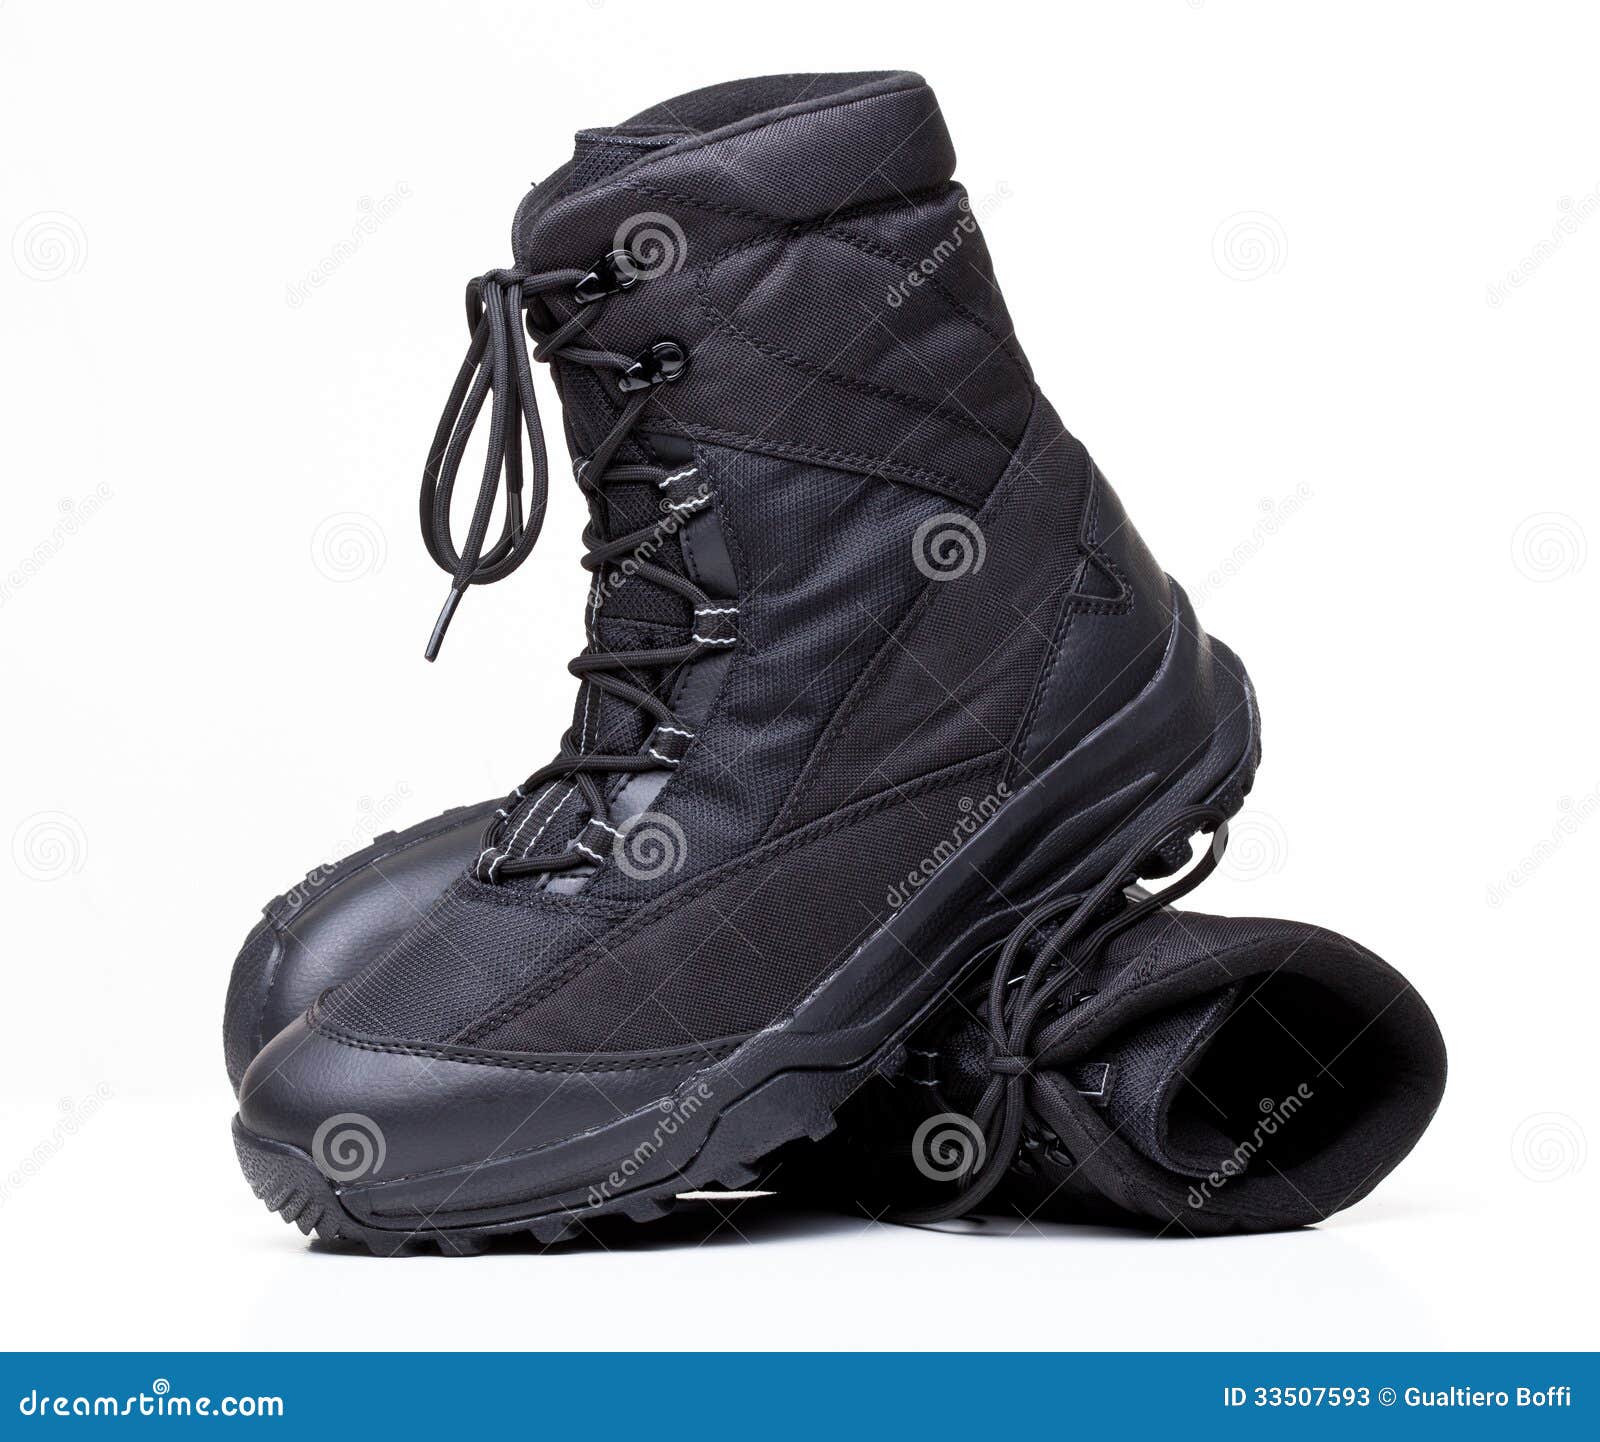 clipart of winter boots - photo #24